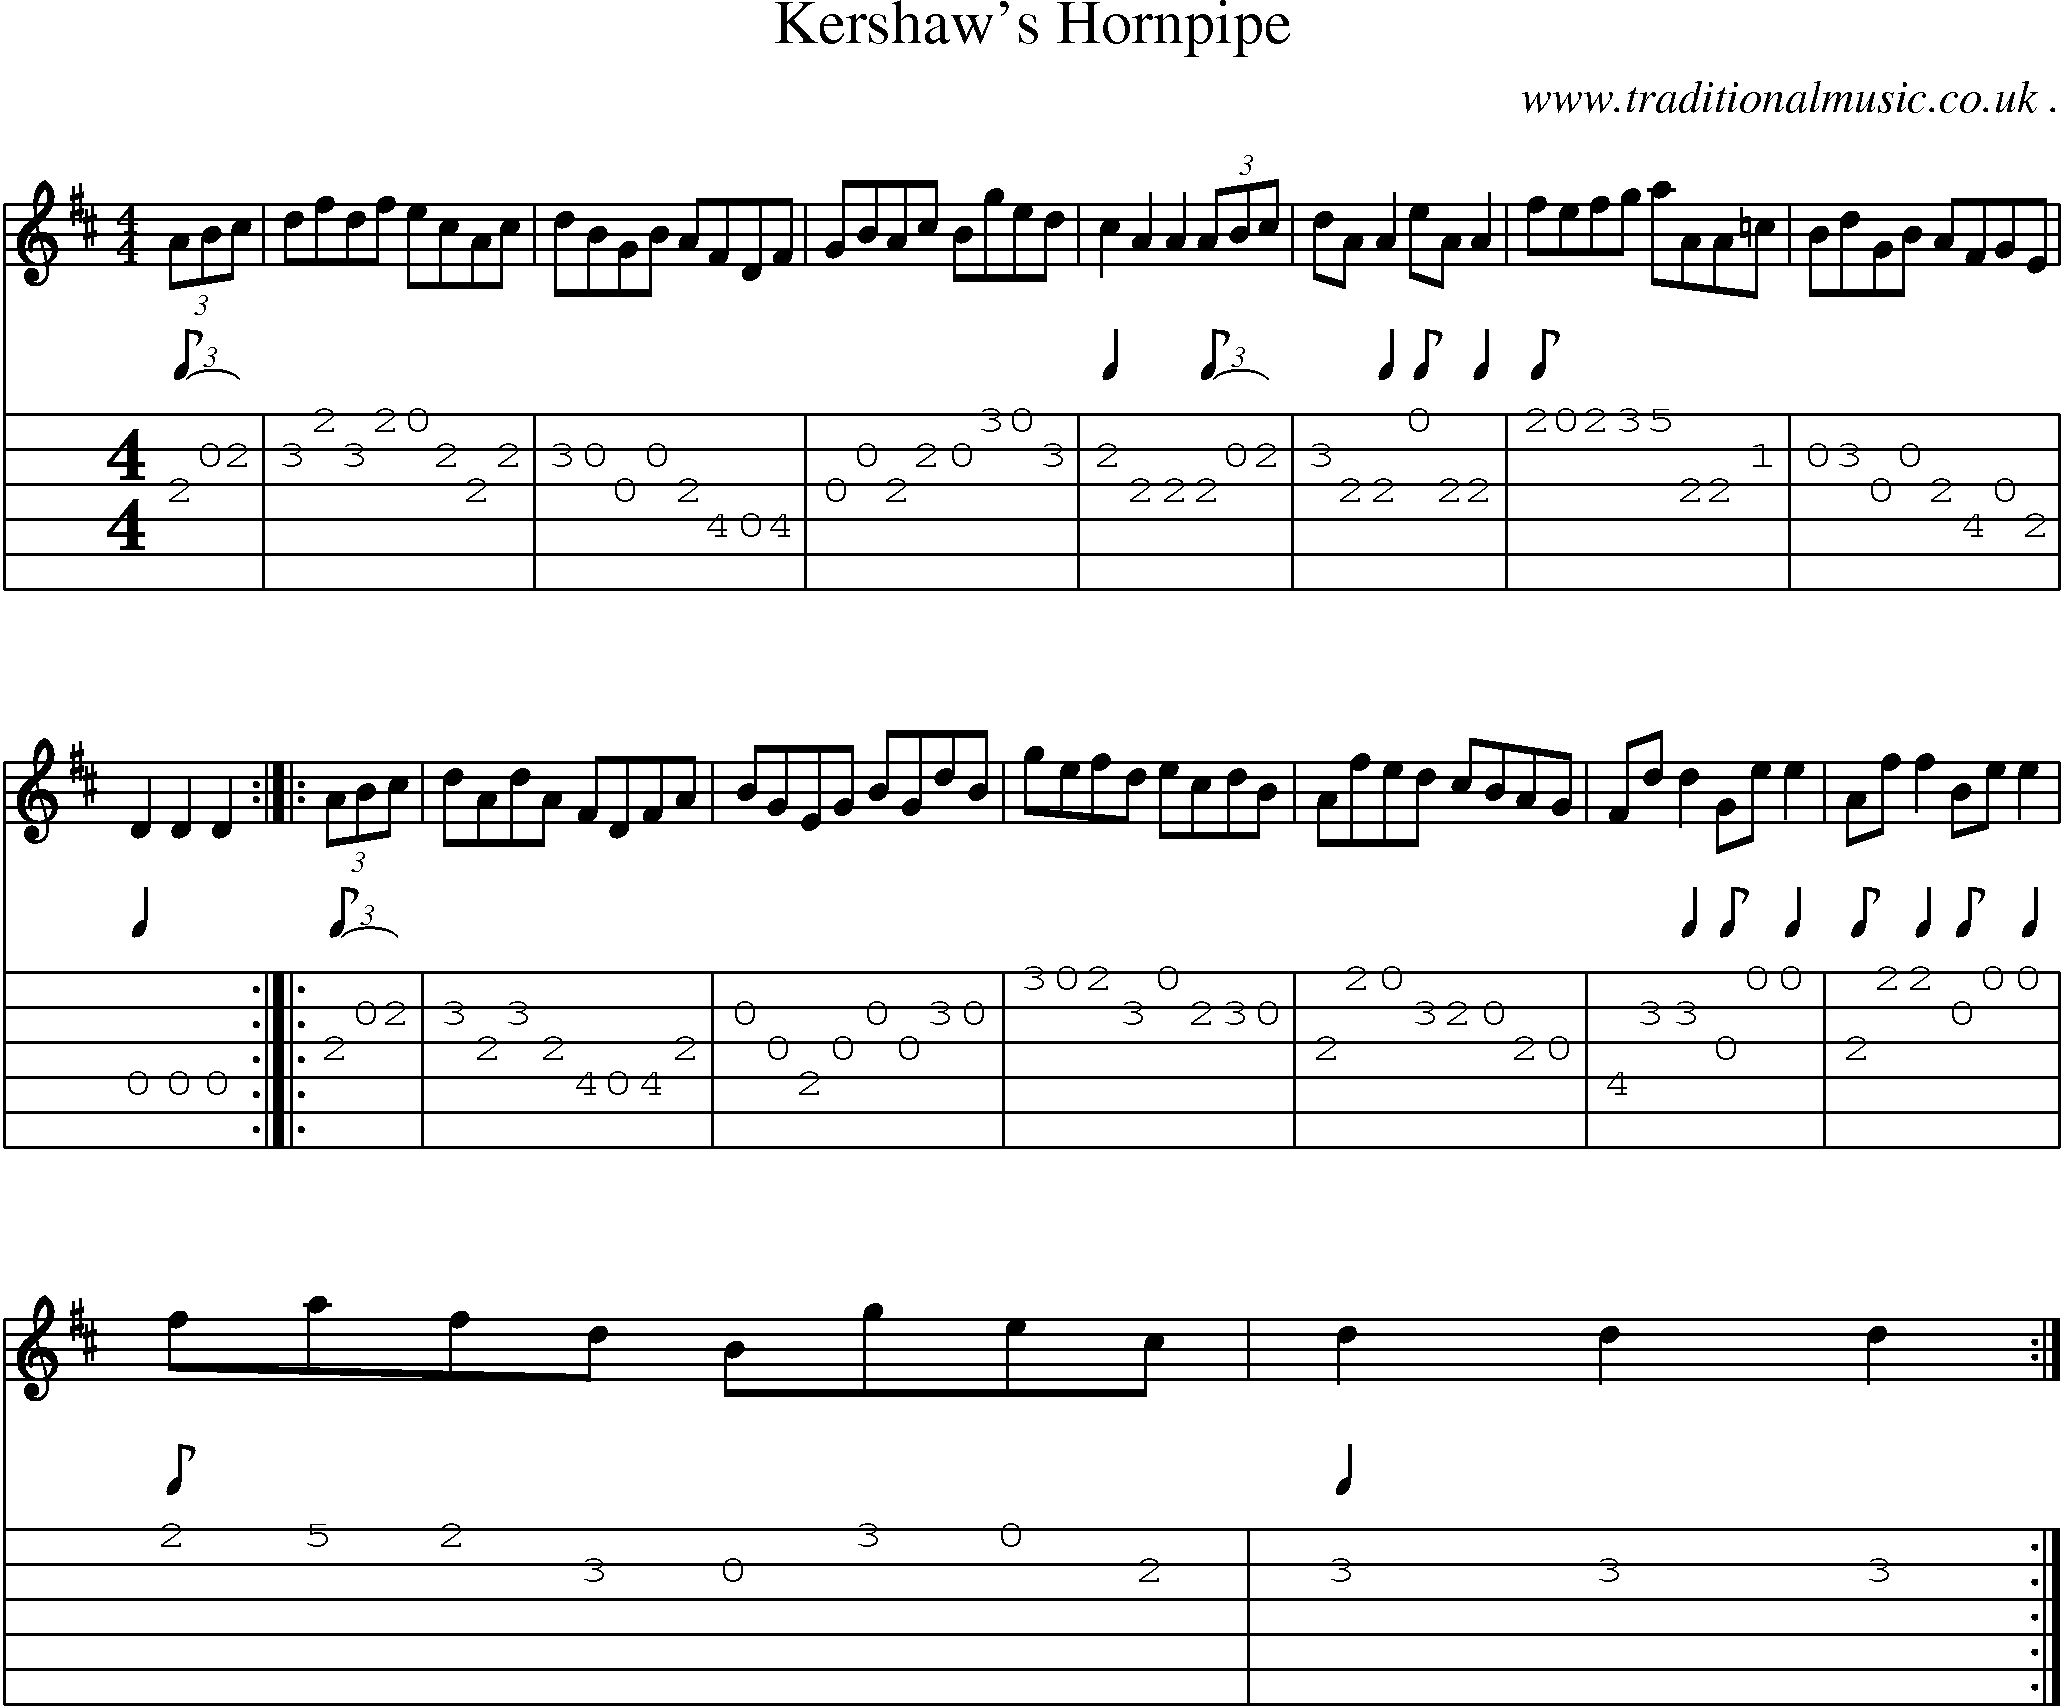 Sheet-Music and Guitar Tabs for Kershaws Hornpipe